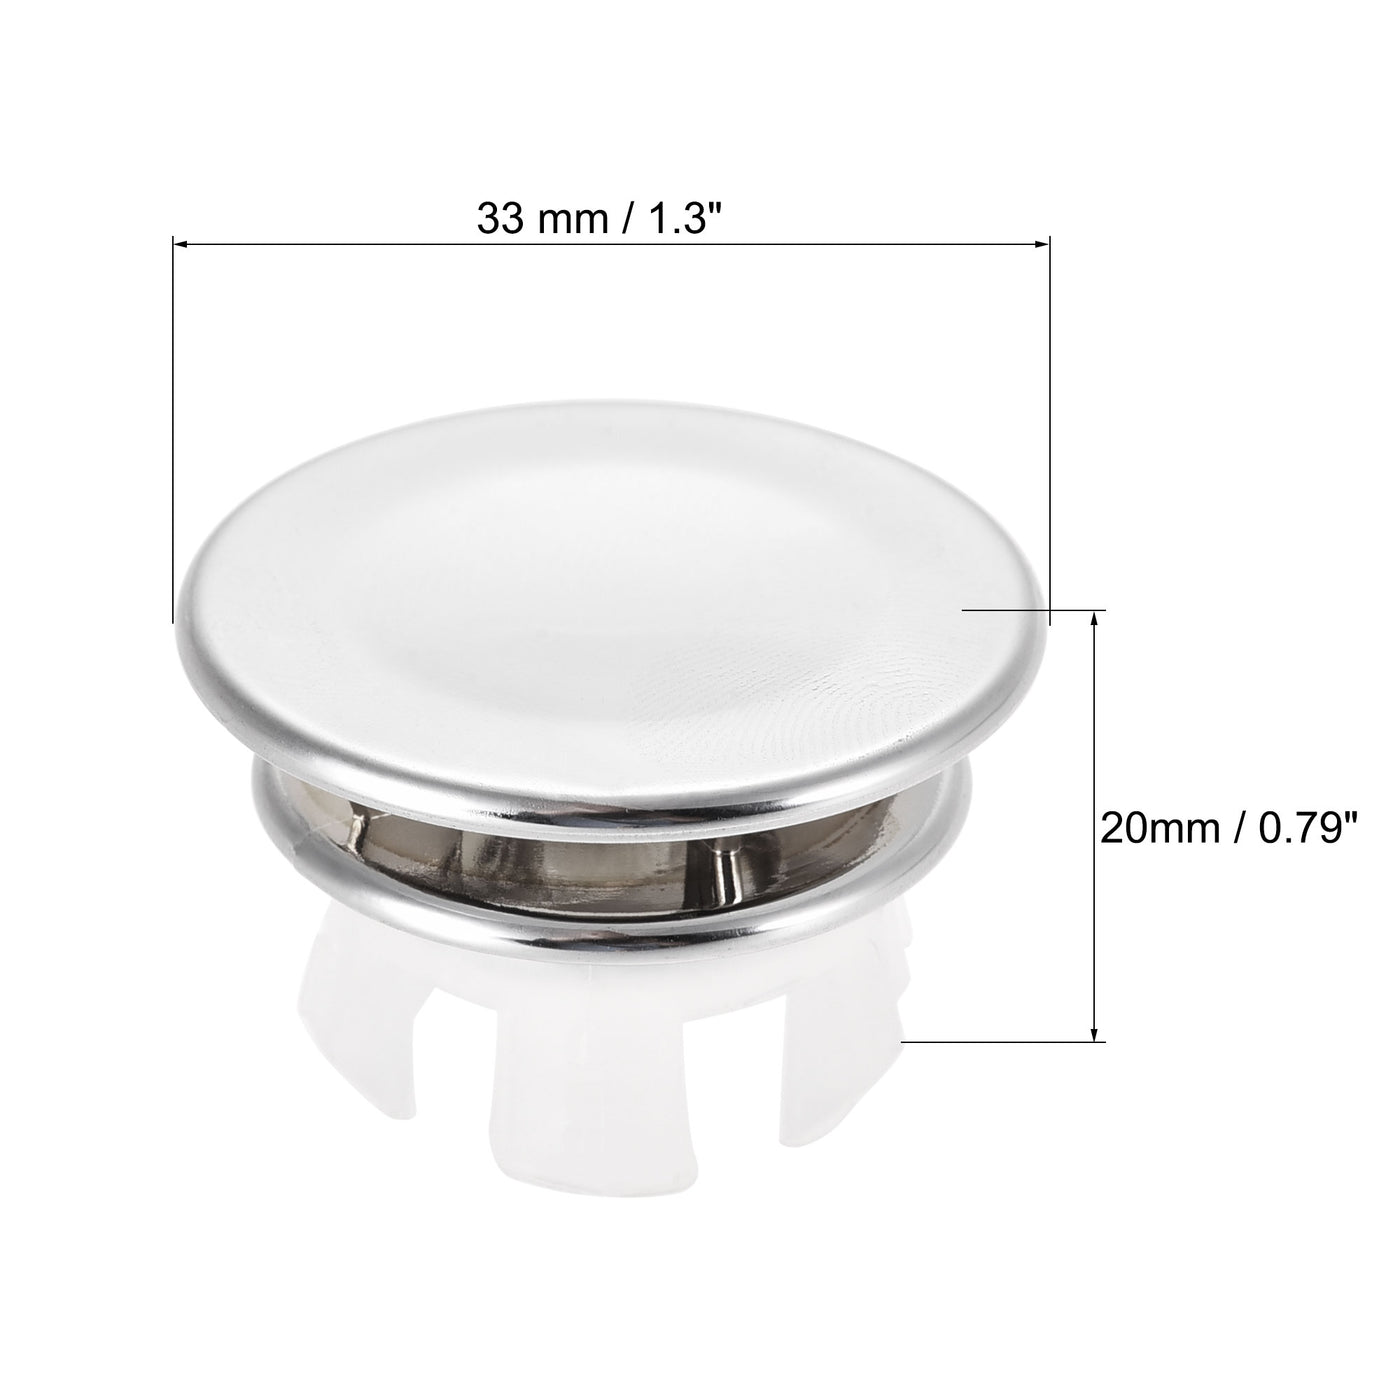 uxcell Uxcell Sink Basin Trim Overflow Cover Insert in Hole Round Caps Silver Tone 33 x 20mm 6pcs